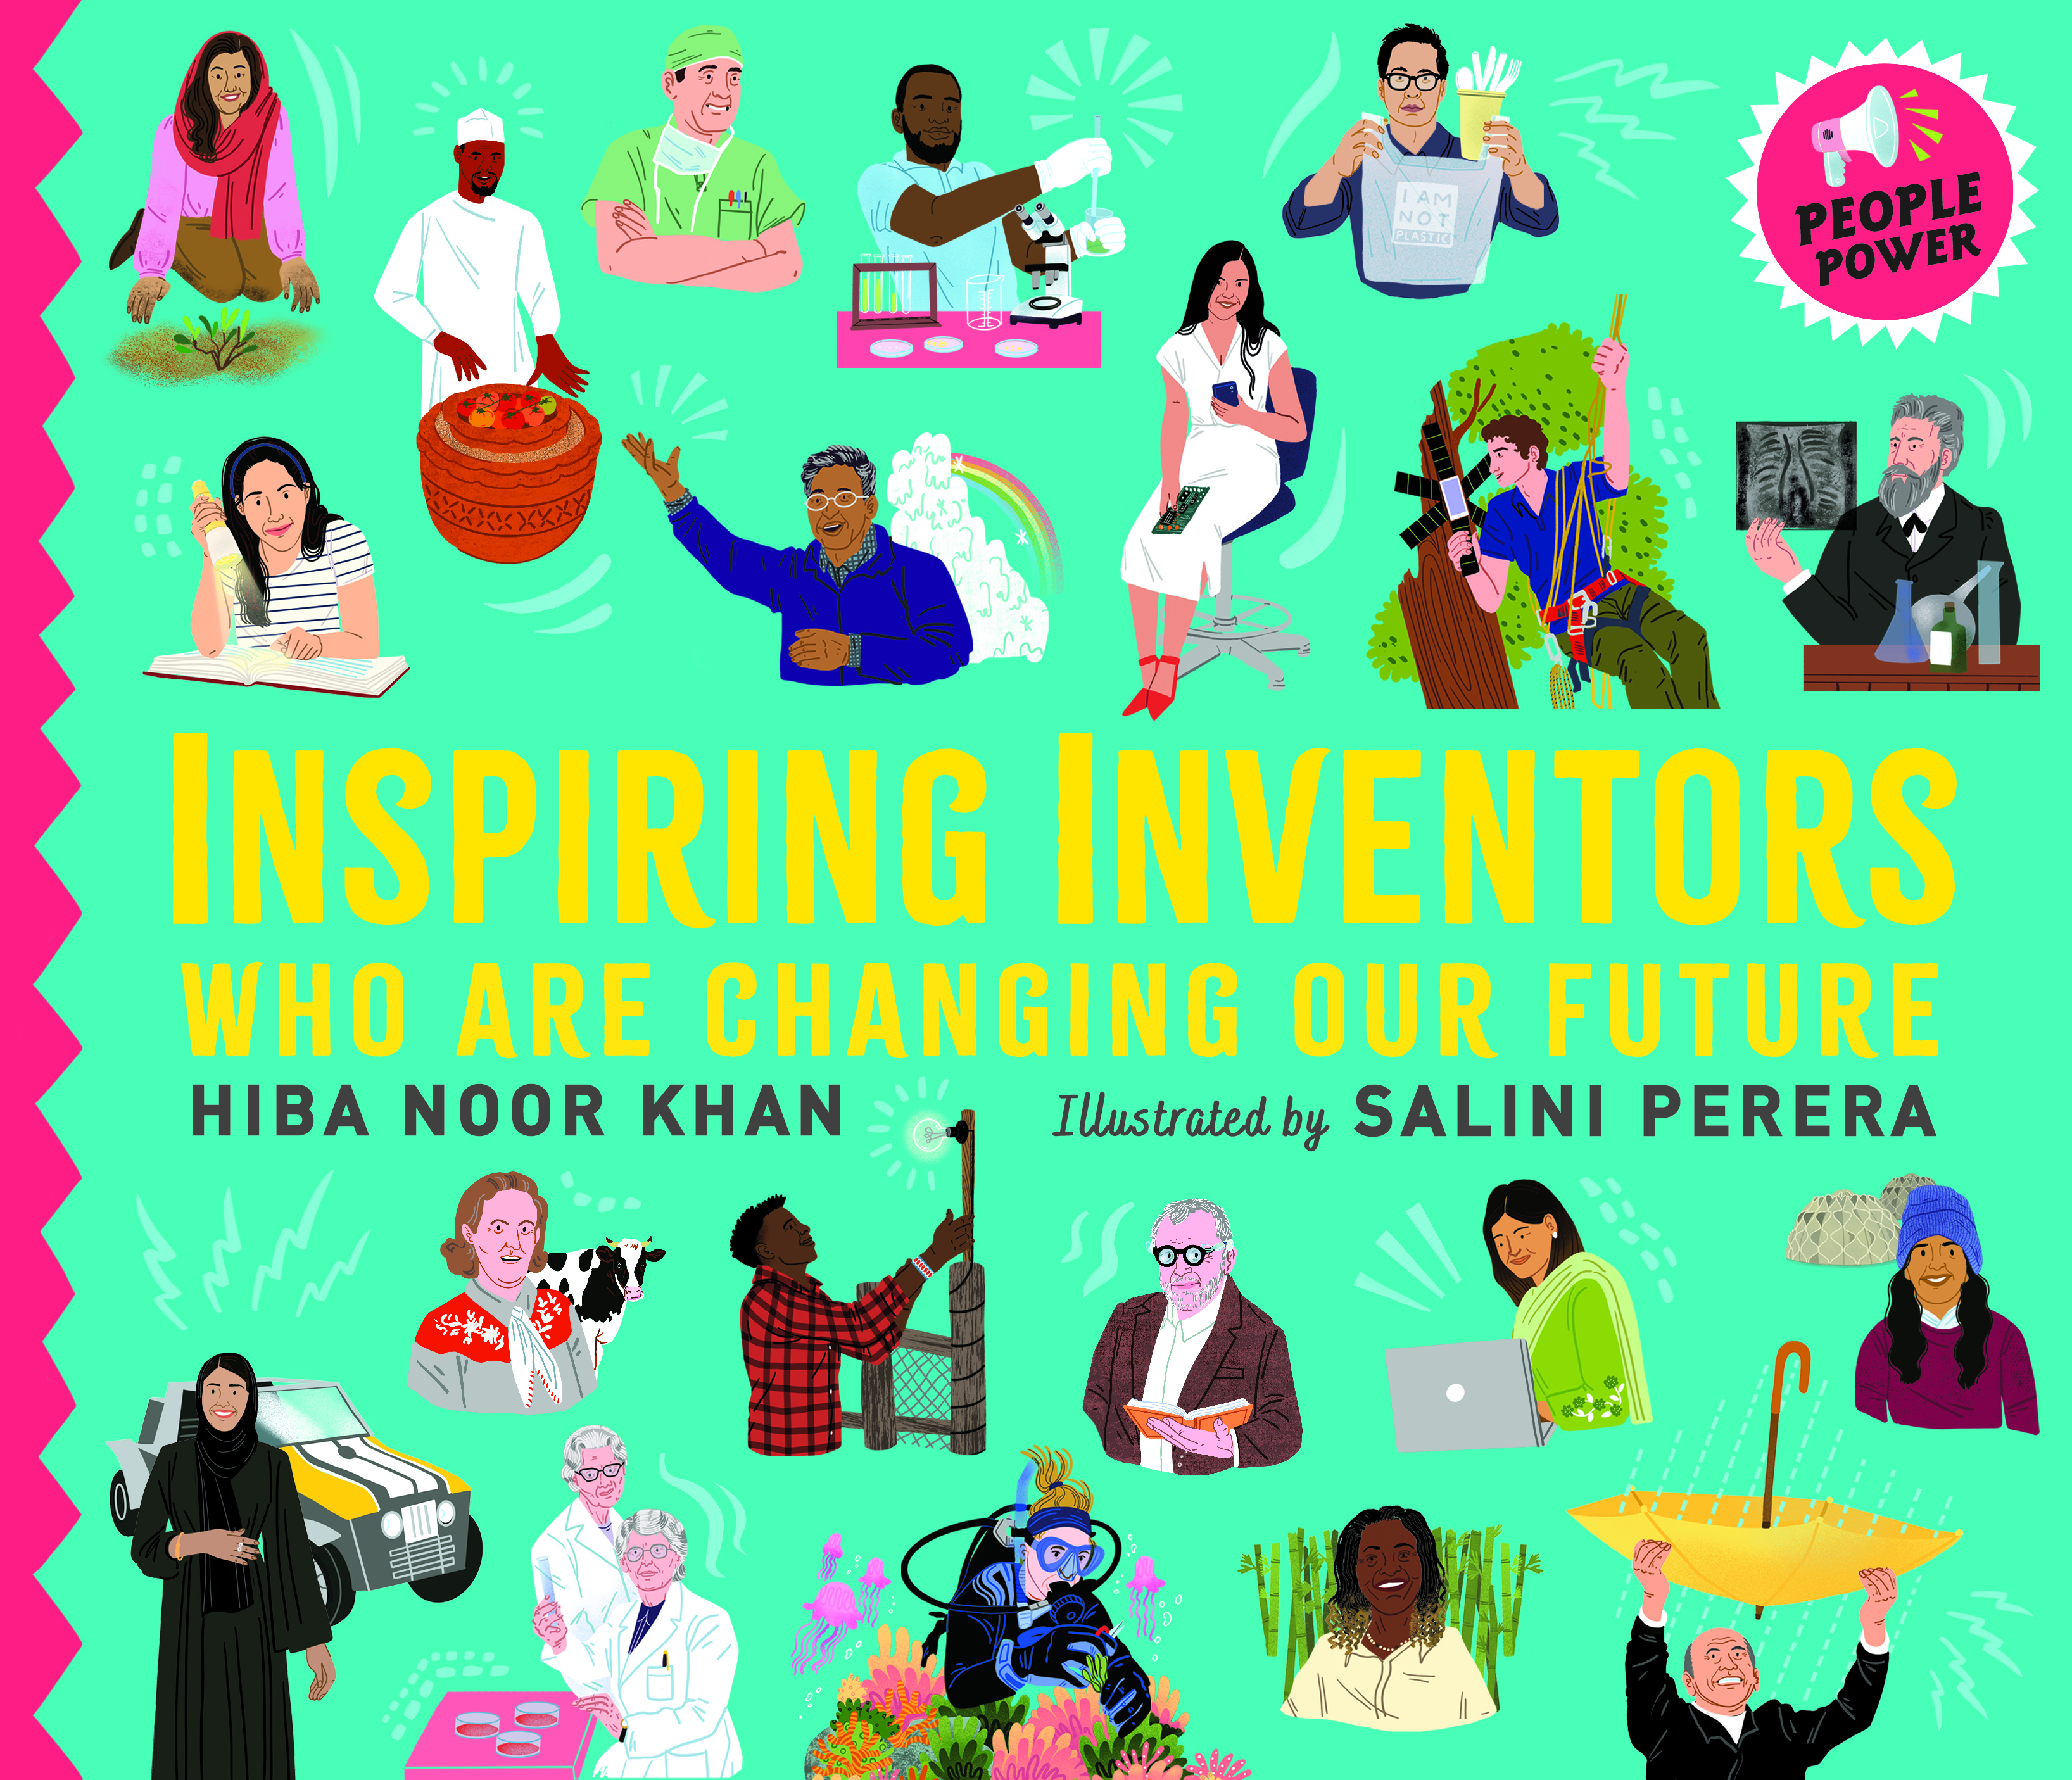 Inspiring-Inventors-Who-Are-Changing-Our-Future